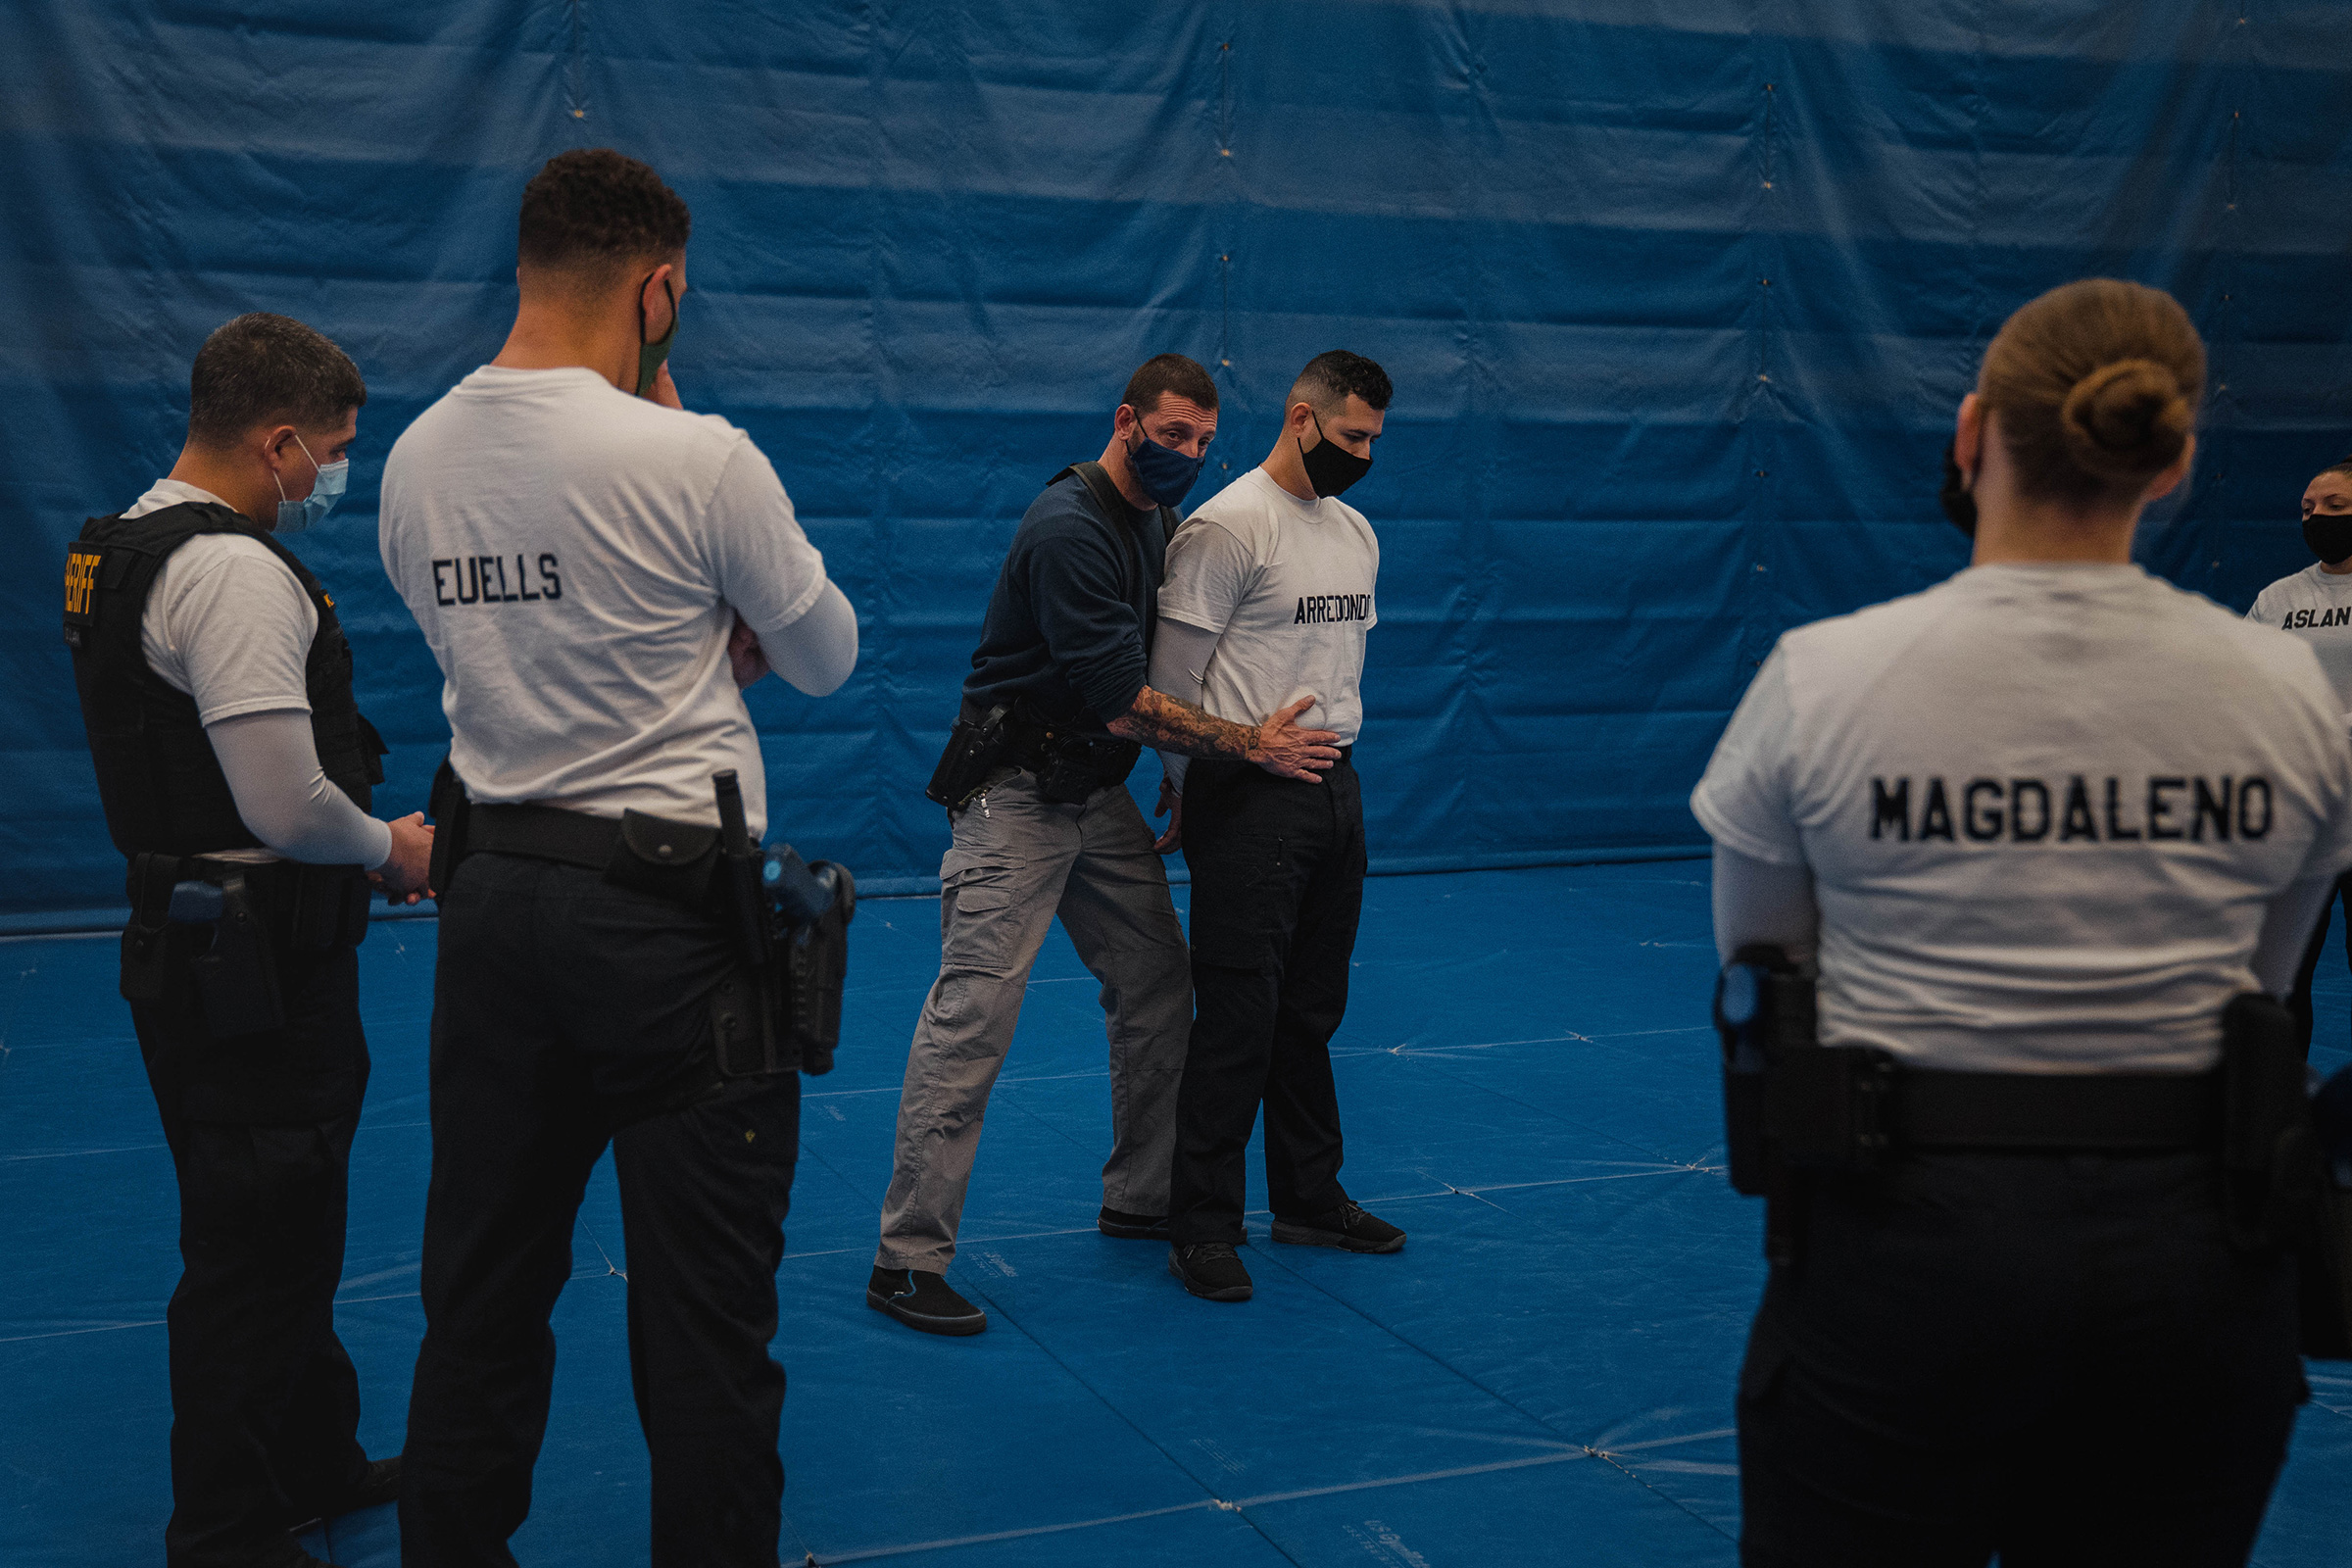 Instructor Javier Sola teaches frisking and handcuffing methods to police recruits.